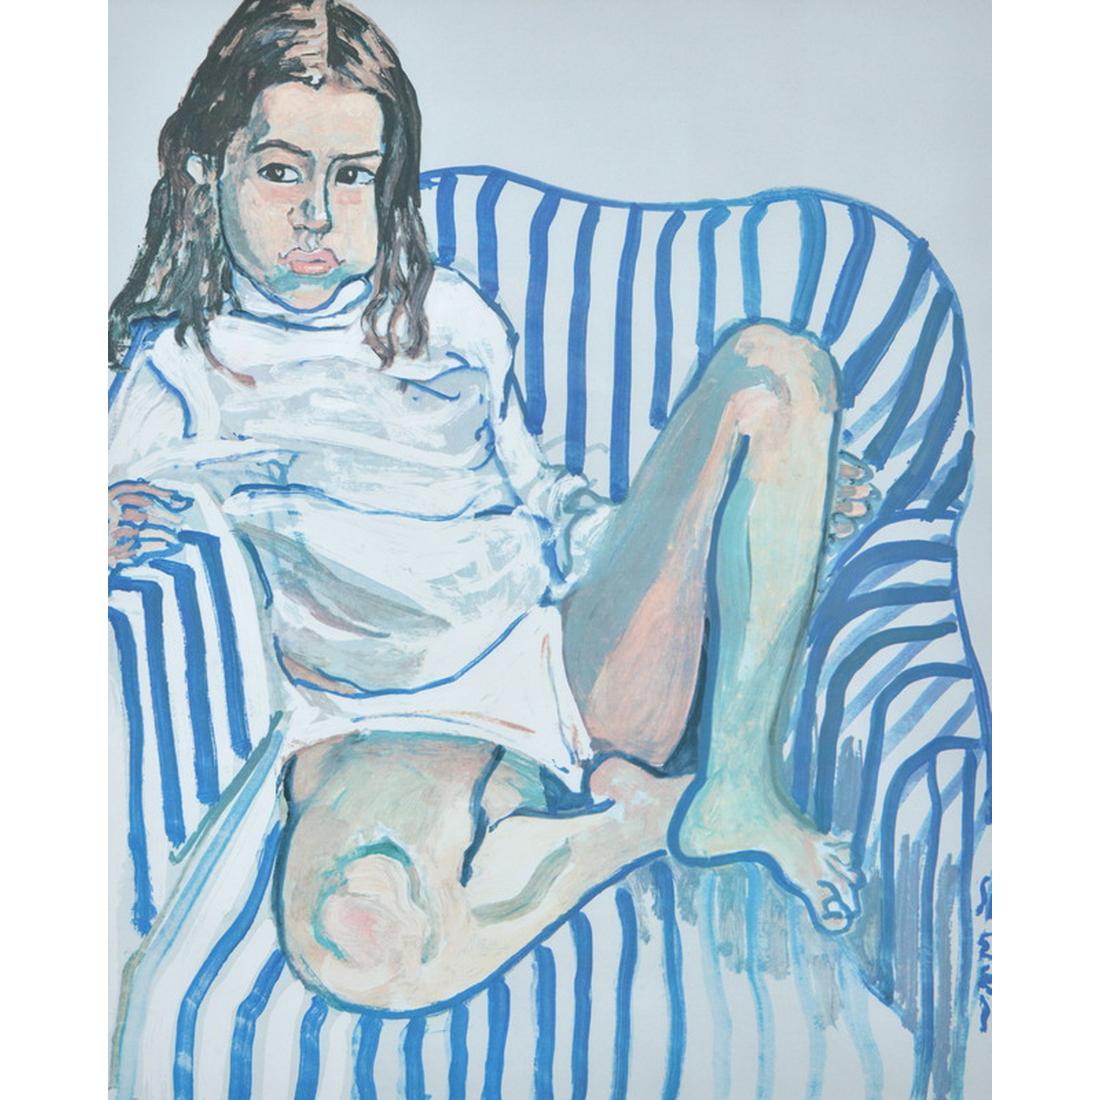 Artist/Designer: Alice Neel (American, 1900-1984)

Additional Information: Full title of the work is “Portrait of a Girl in Blue Chair.”

Marking(s); notes: signed twice (once in plate, once in pencil); ed. 145/200

Country of origin; materials: